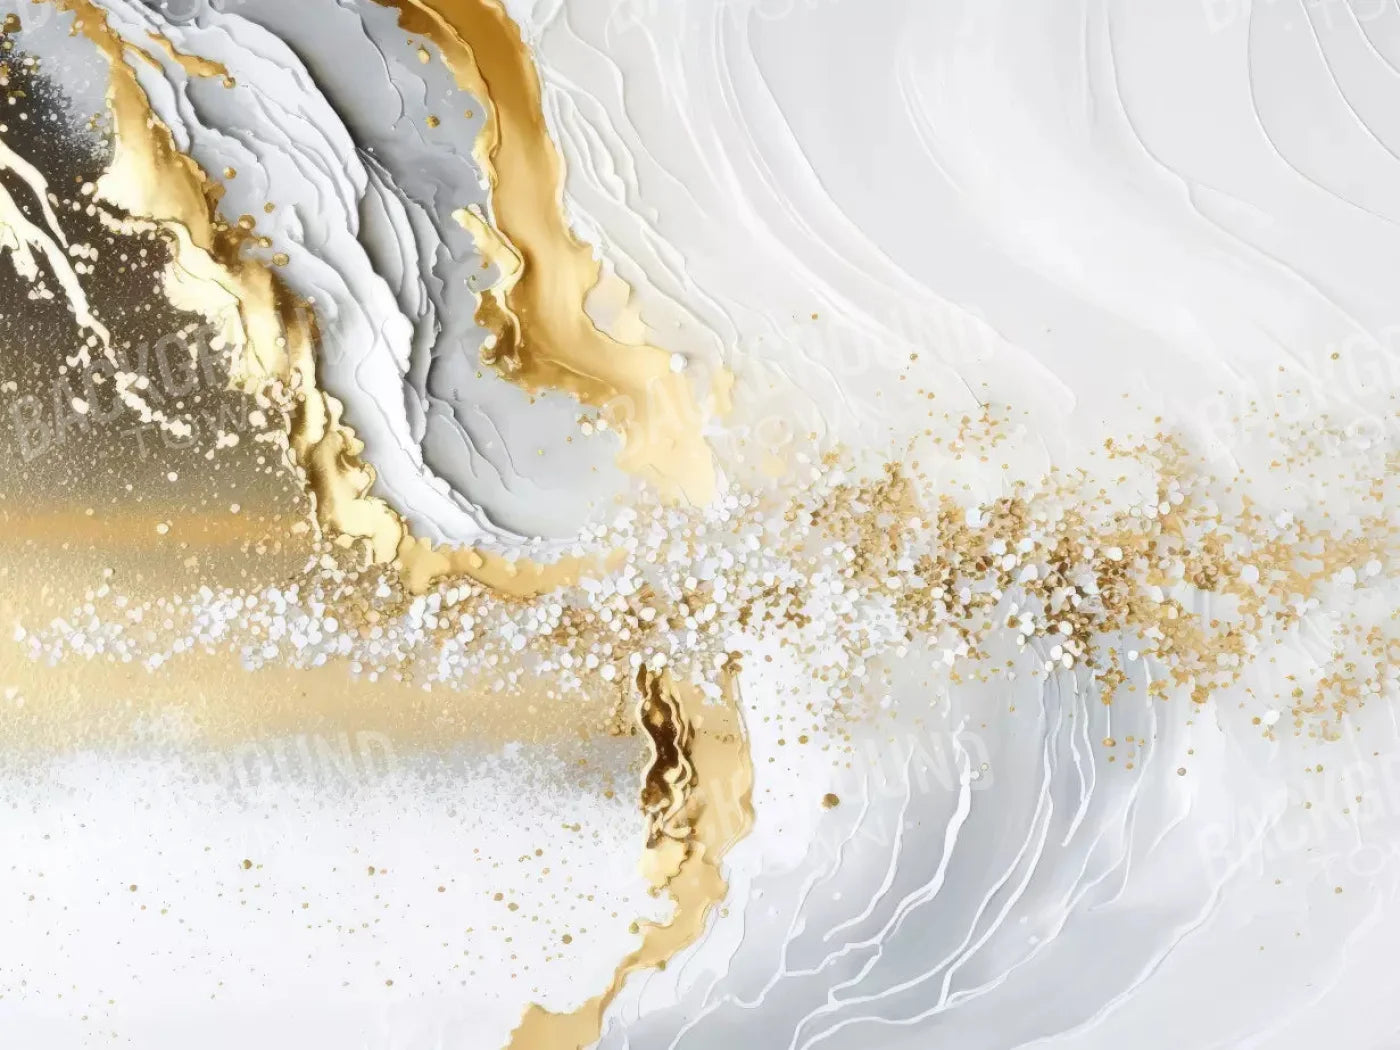 Abstract In Gold And White H 7X5 Ultracloth ( 84 X 60 Inch ) Backdrop